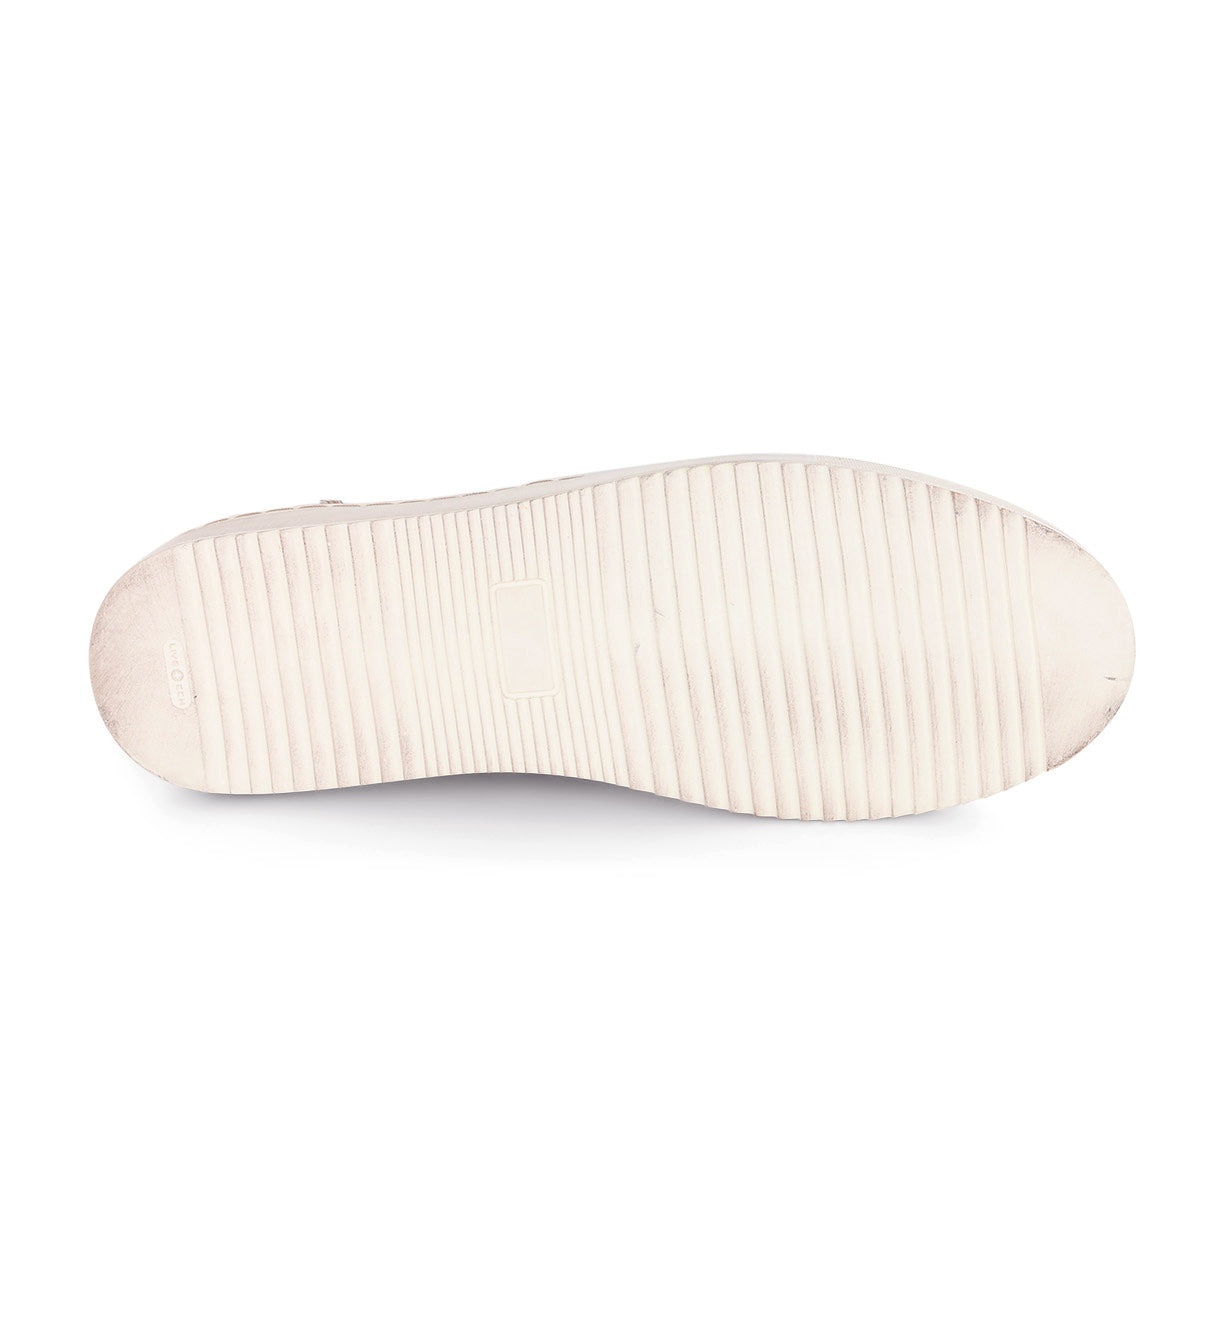 A Harry shoe with white soles on a white background by Bed Stu.